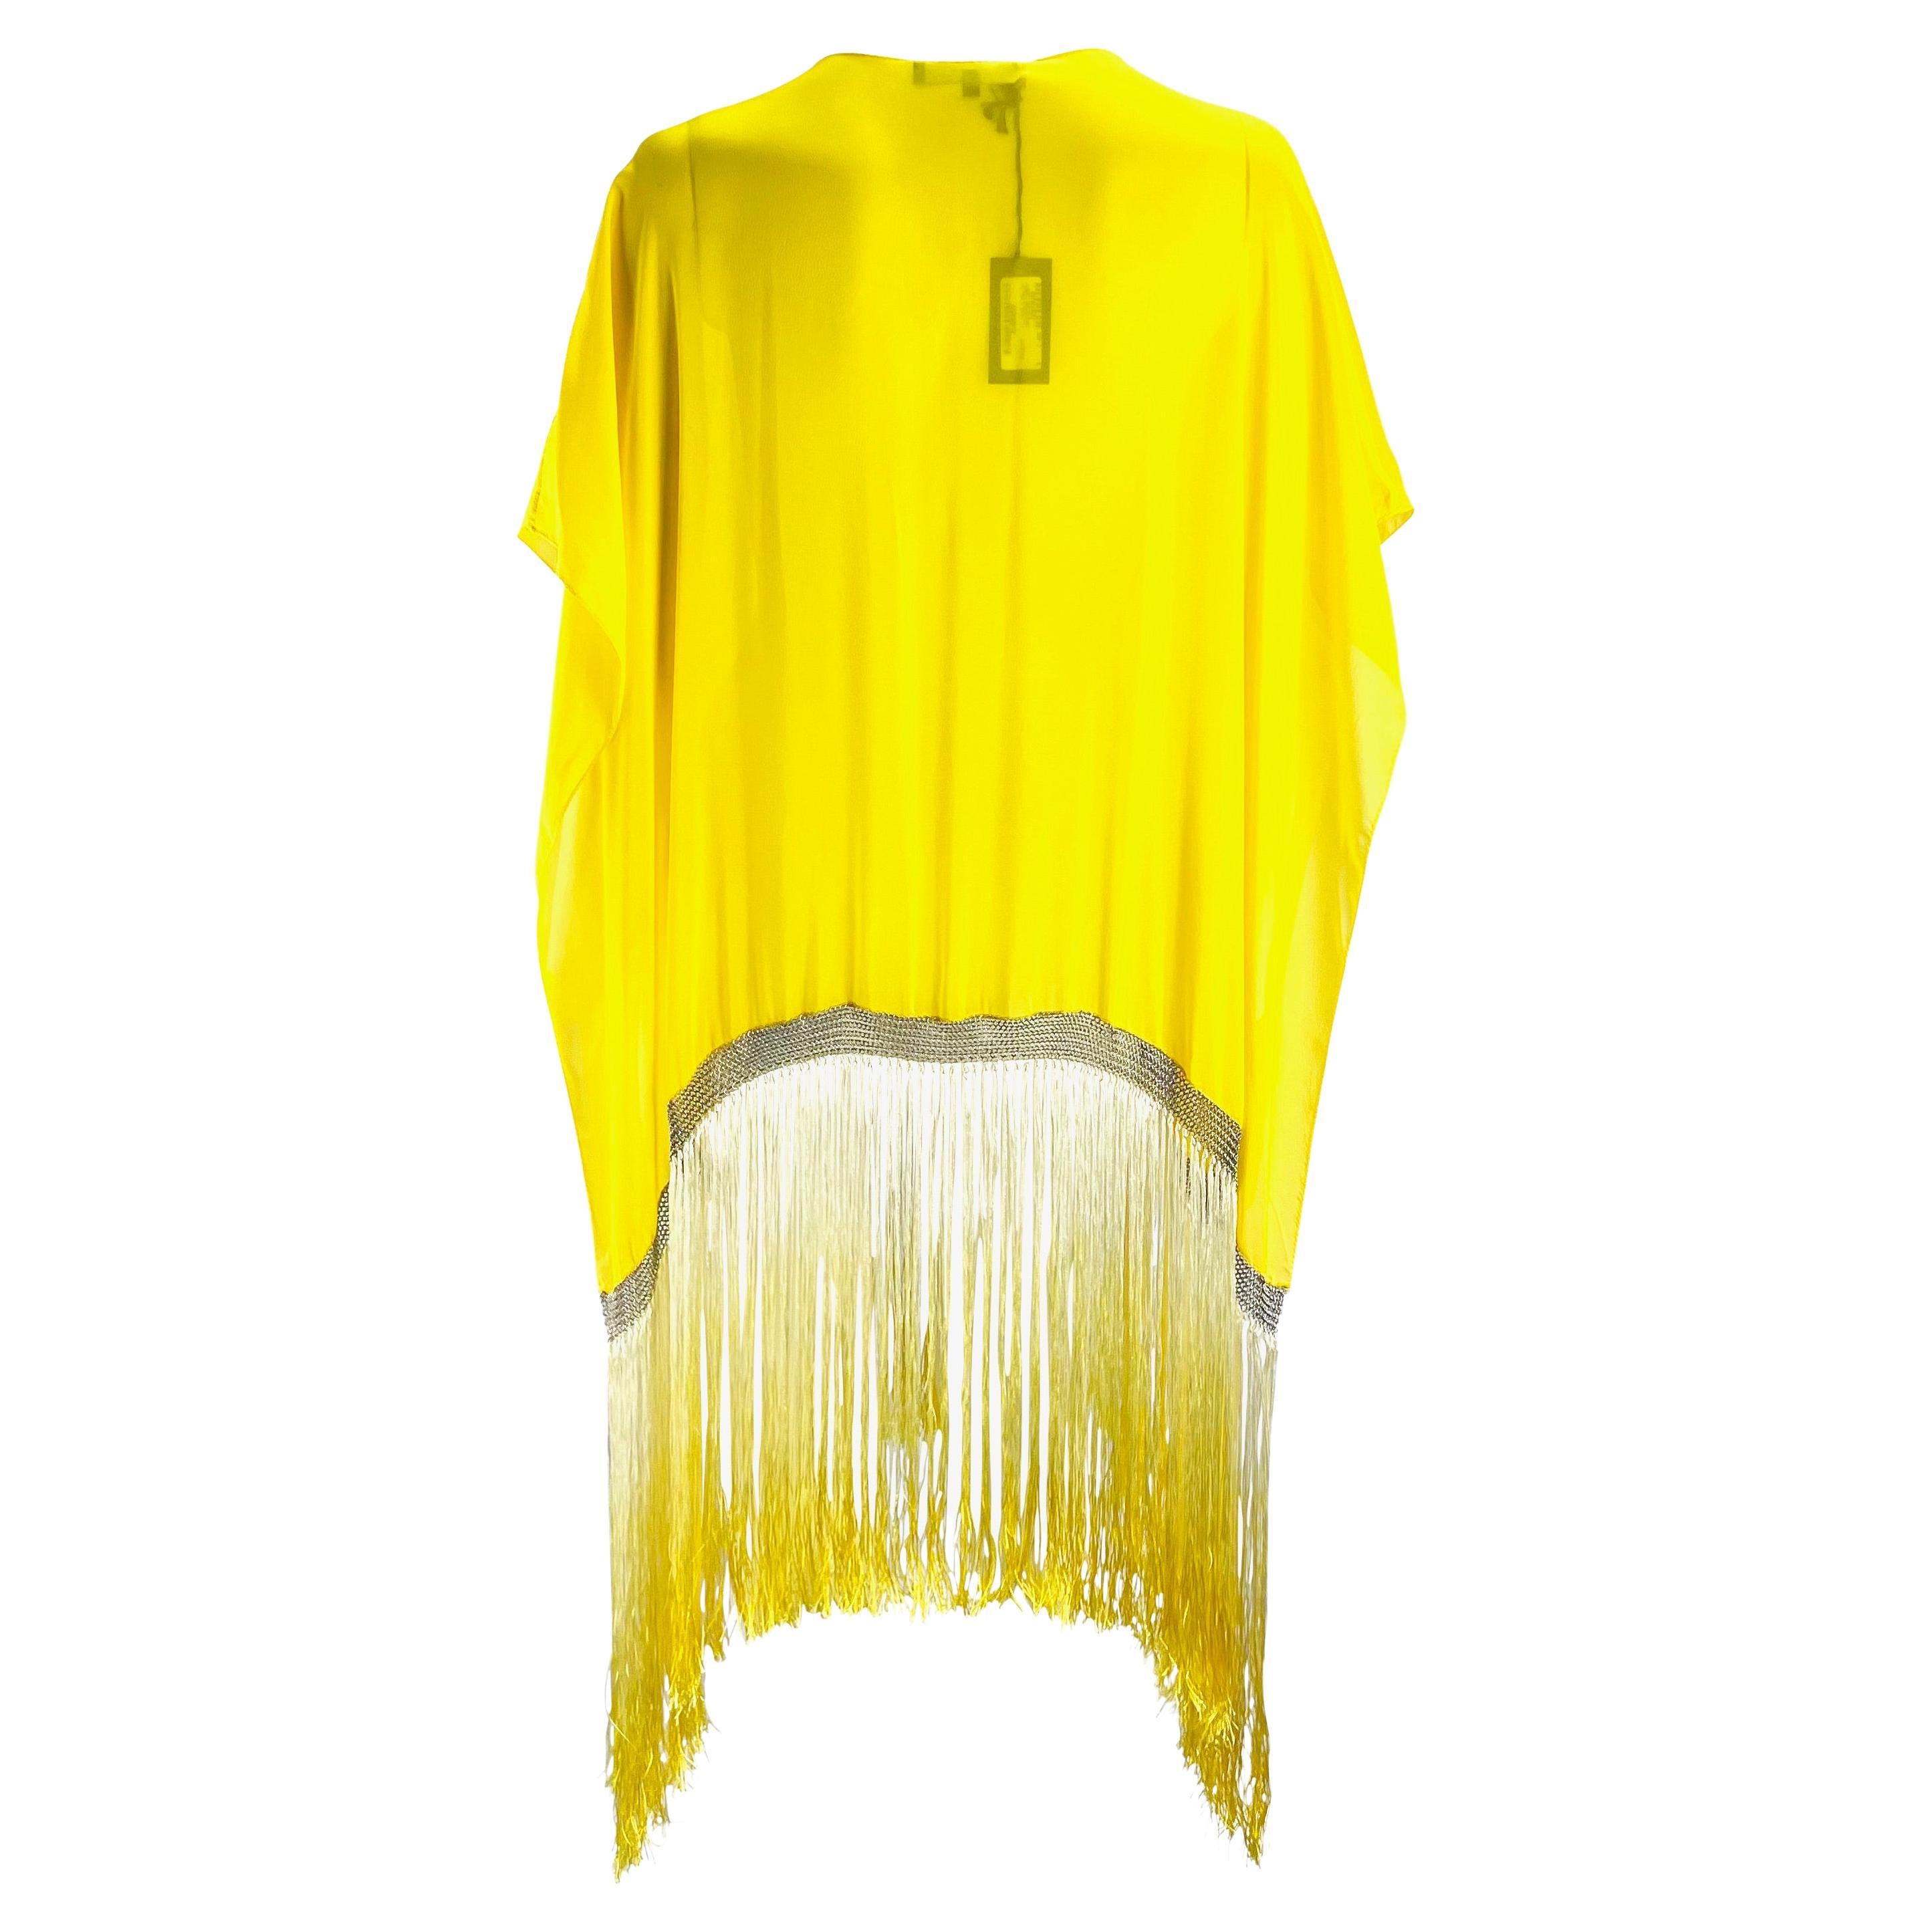 S/S 2004 Gucci by Tom Ford Chain Link Yellow Ombré Fringe Kaftan Cover Up NWT For Sale 3